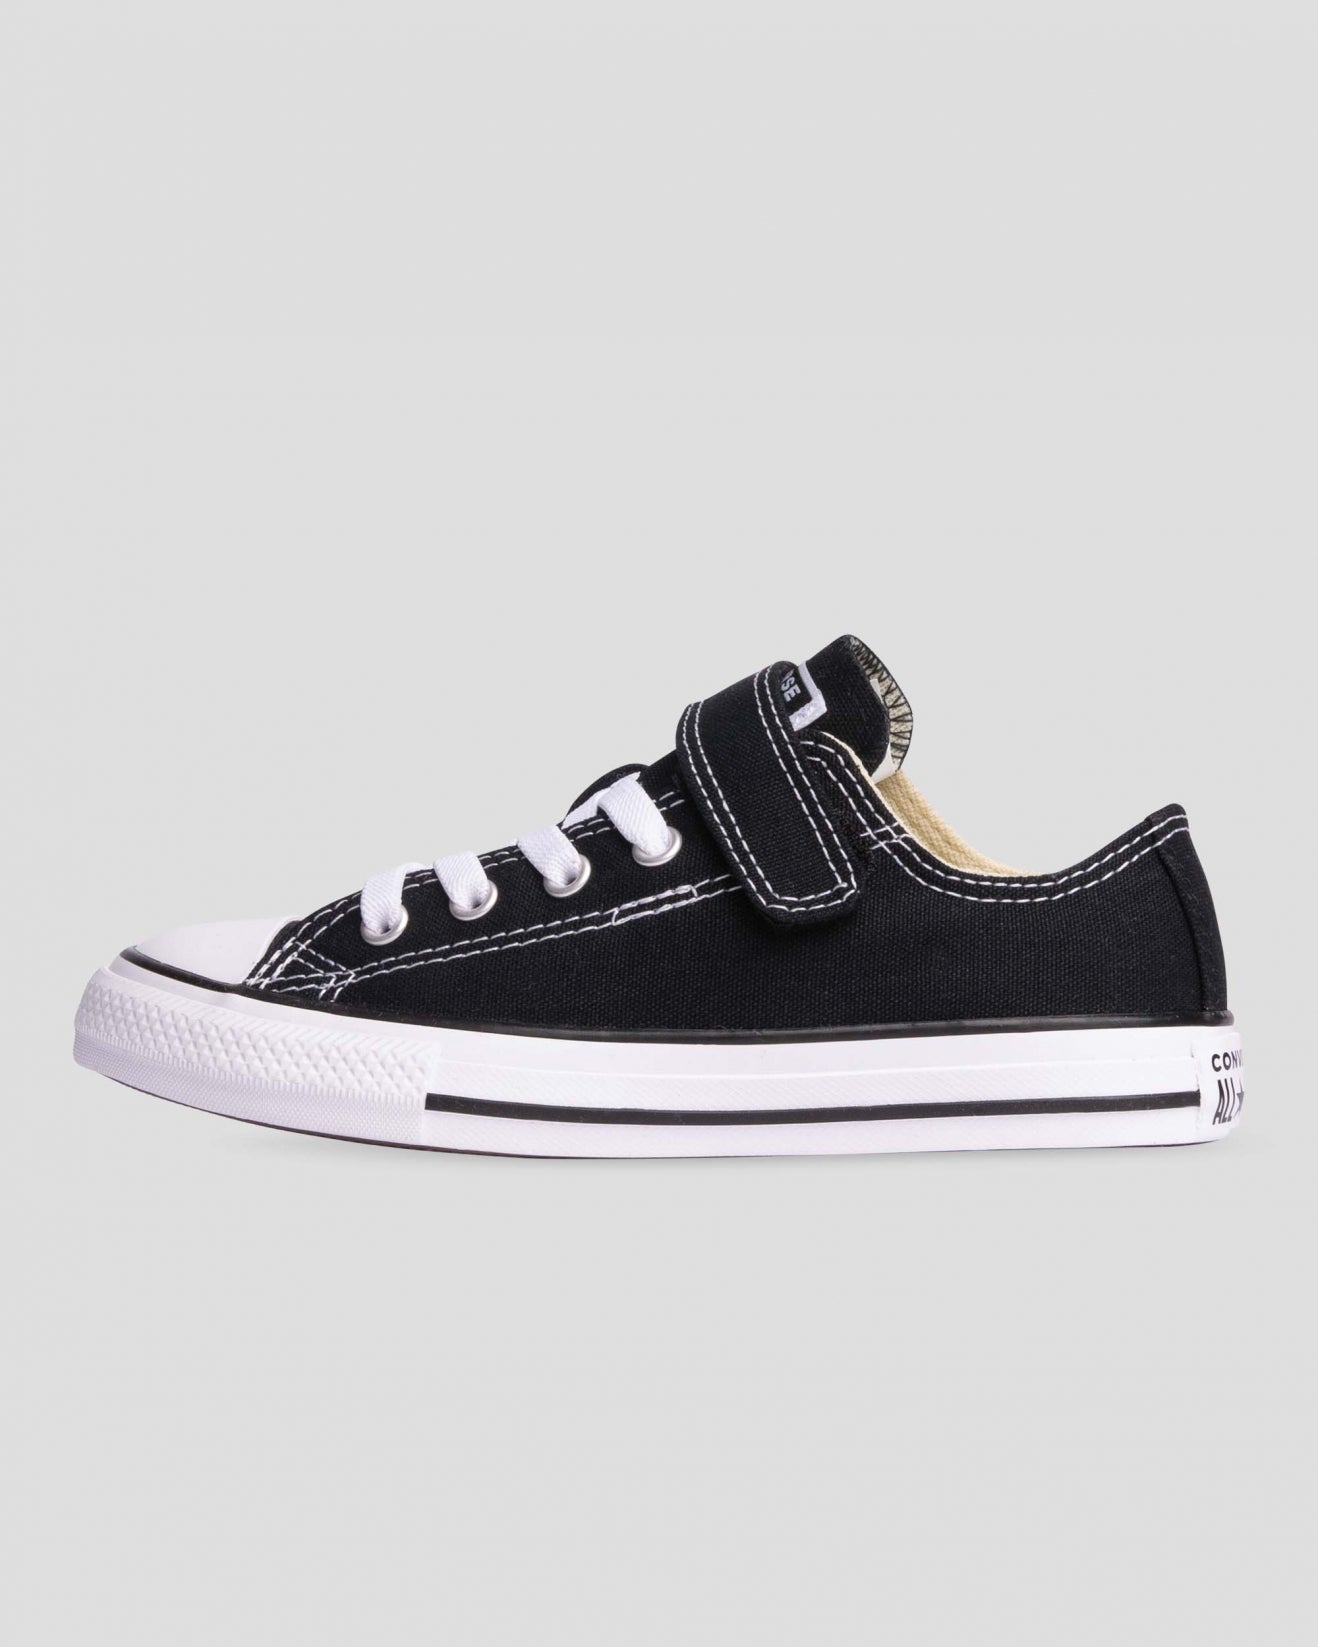 + Converse Chuck Taylor All Star Easy On 1V Junior Low Top Black Velcro / Elastic Laces - (372881) - VCB - R1L1